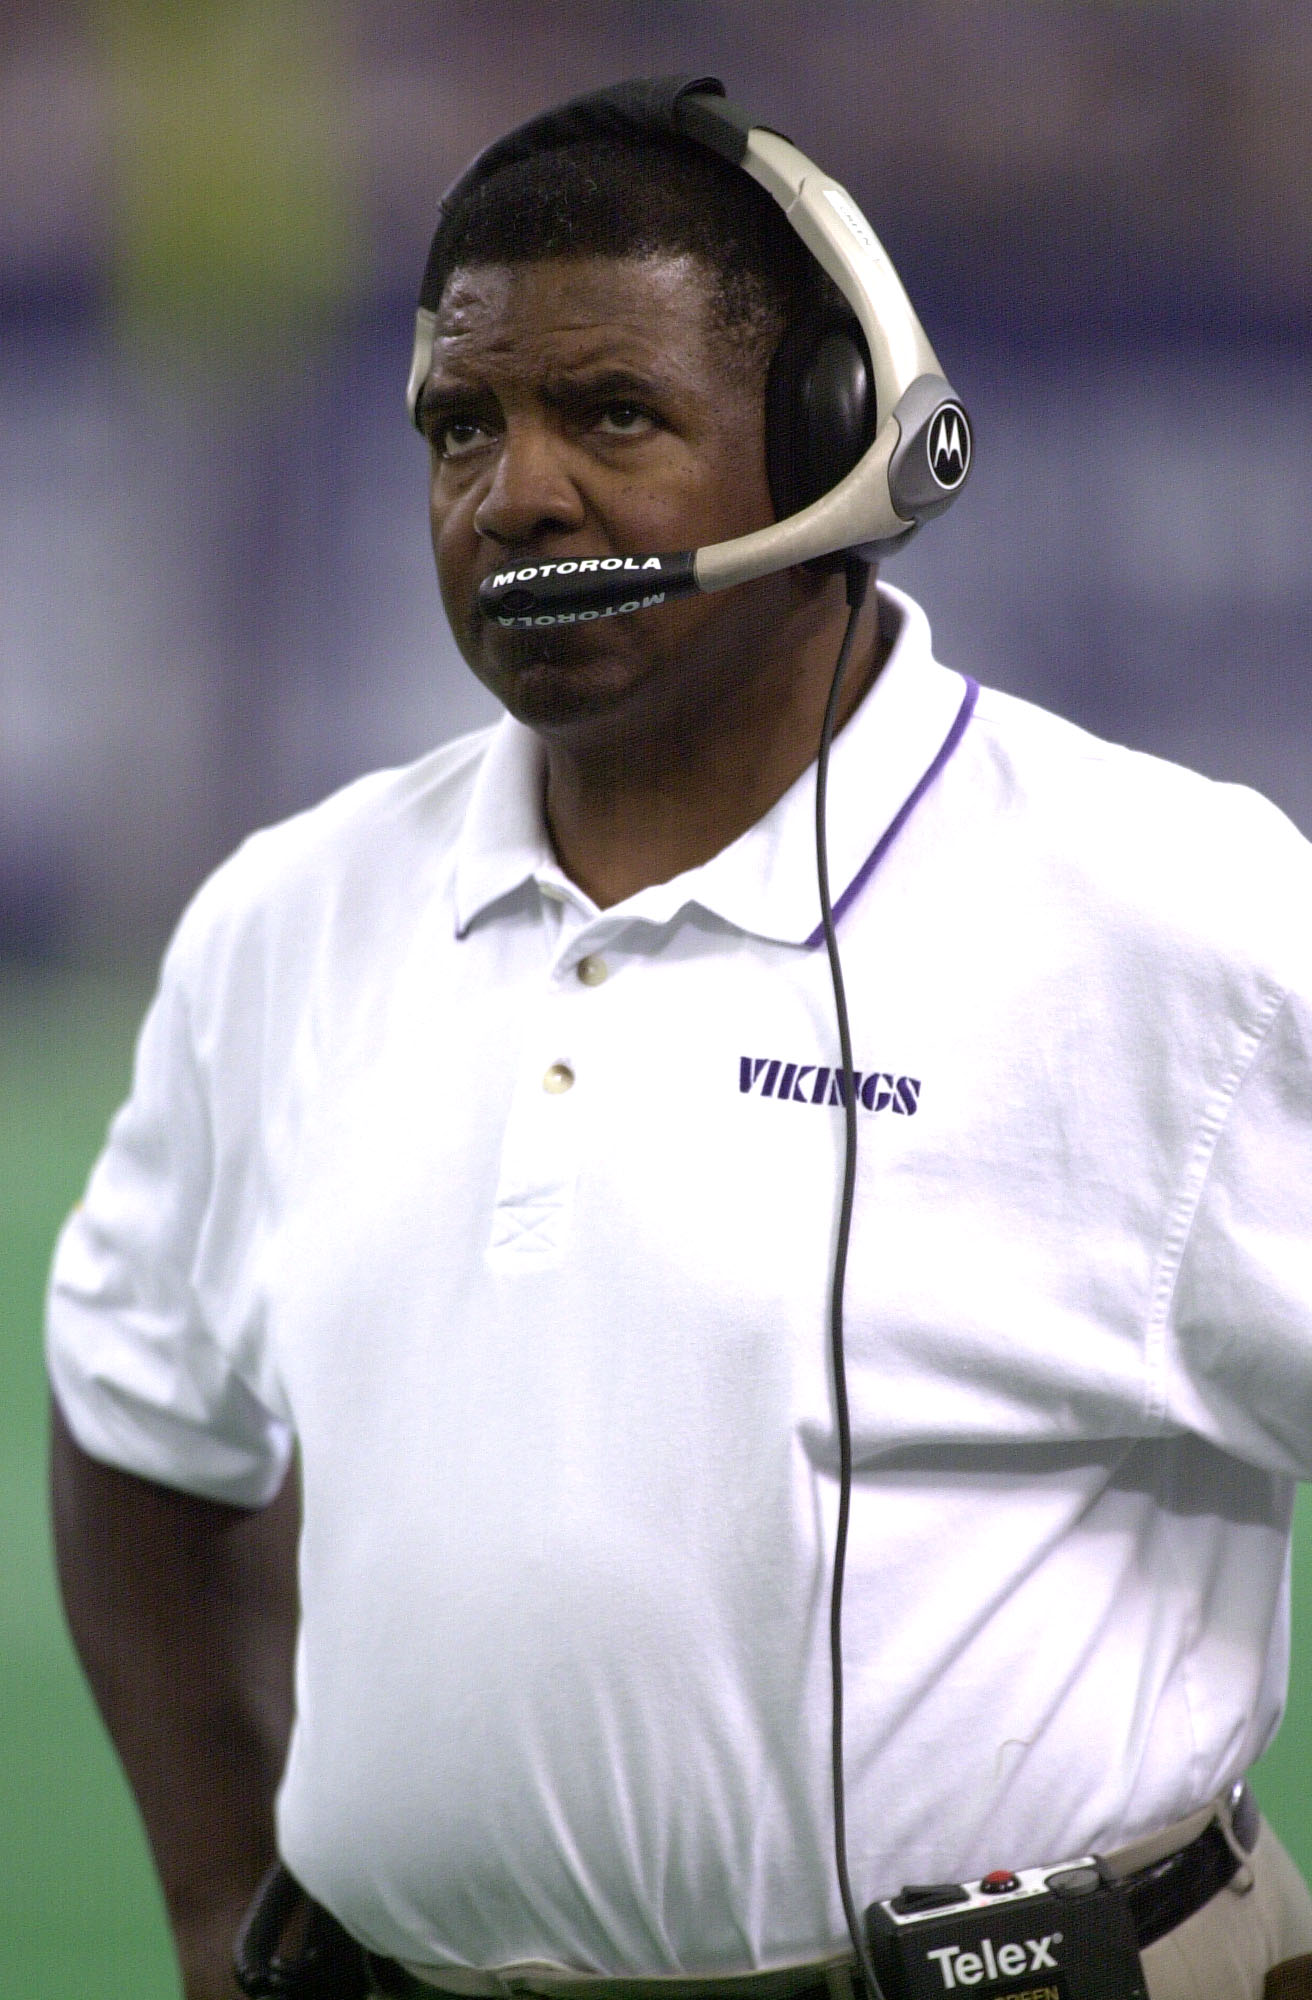 30 Sep 2001: Head coach Dennis Green of the the Minnesota Vikings observes his team during the match against the Tampa Bay Buccaneers at the Hubert H. Humphrey Metrodome in Minneapolis, Minnesota. The Vikings won 20-16. DIGITAL IMAGE  Mandatory Credit: Jo